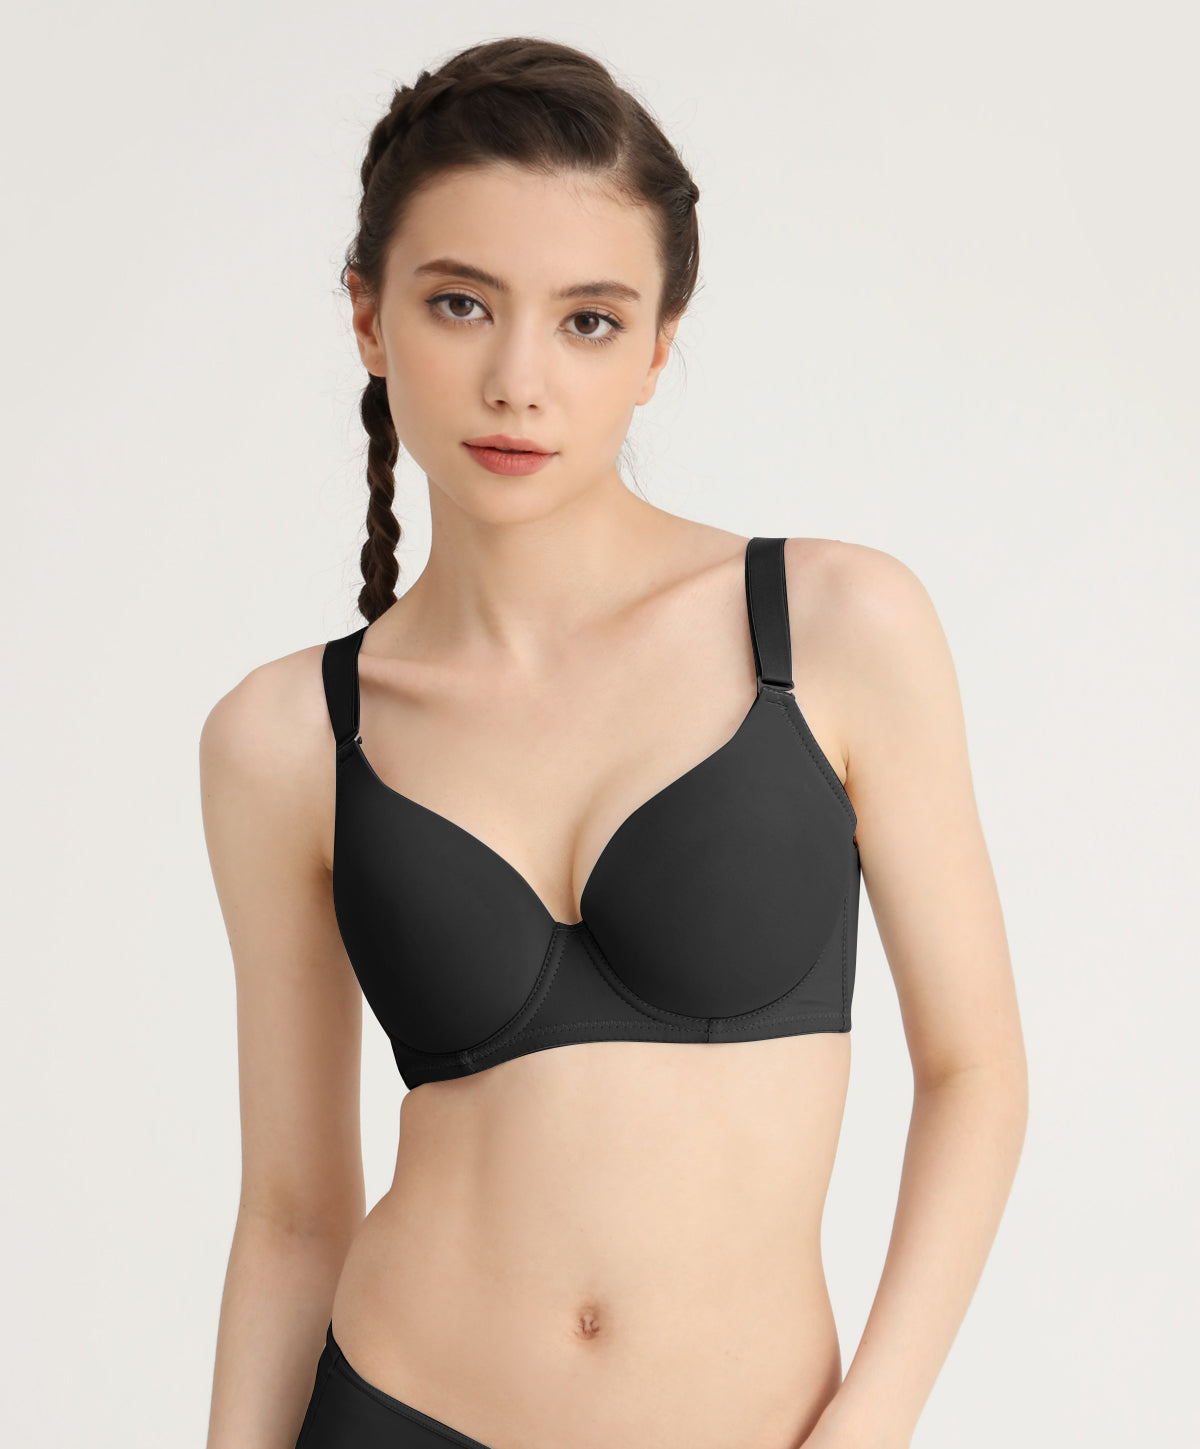 Pierre Cardin Lingerie Malaysia - Women should be well versed with  different types of bra available in the market for them to make decision  that match their outfits. Having the right bra